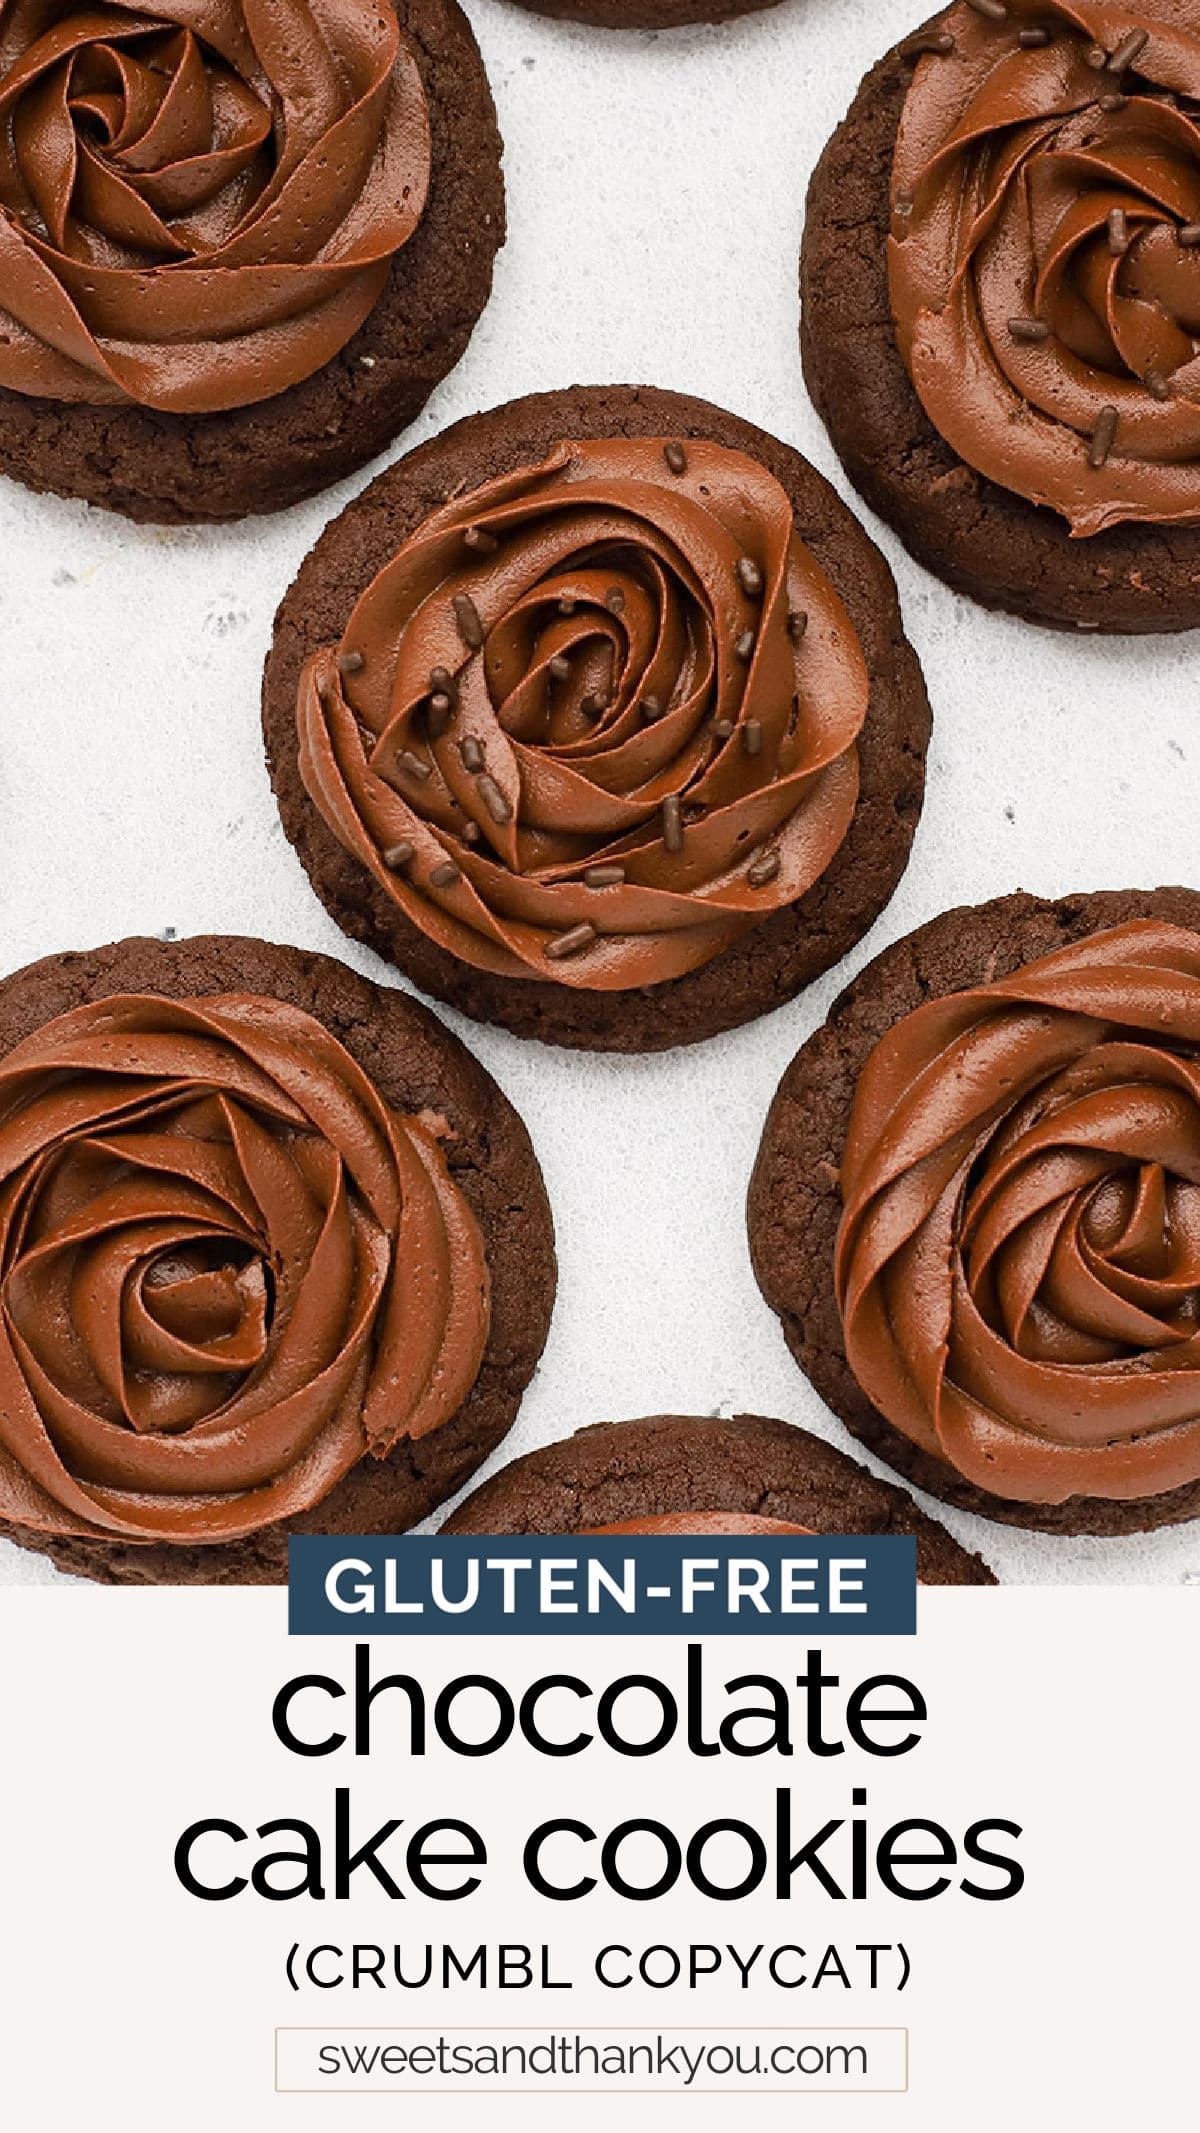 Gluten-Free Chocolate Cake Cookies - Our Crumbl copycat chocolate cake cookies with chocolate frosting are your new favorite way to satisfy a chocolate craving. You'll love these pretty cookies! // Gluten-Free Chocolate Cake Cookie Recipe // Gluten-Free Crumbl Cookies // Gluten-Free Chocolate Cookies // Gluten-Free Crumbl Copycat Cookies // Gluten-Free Bakery Style Cookies #glutenfreecookies #crumblcookies #chocolatecookies #glutenfreebaking #cookies #chocolate #crumbl